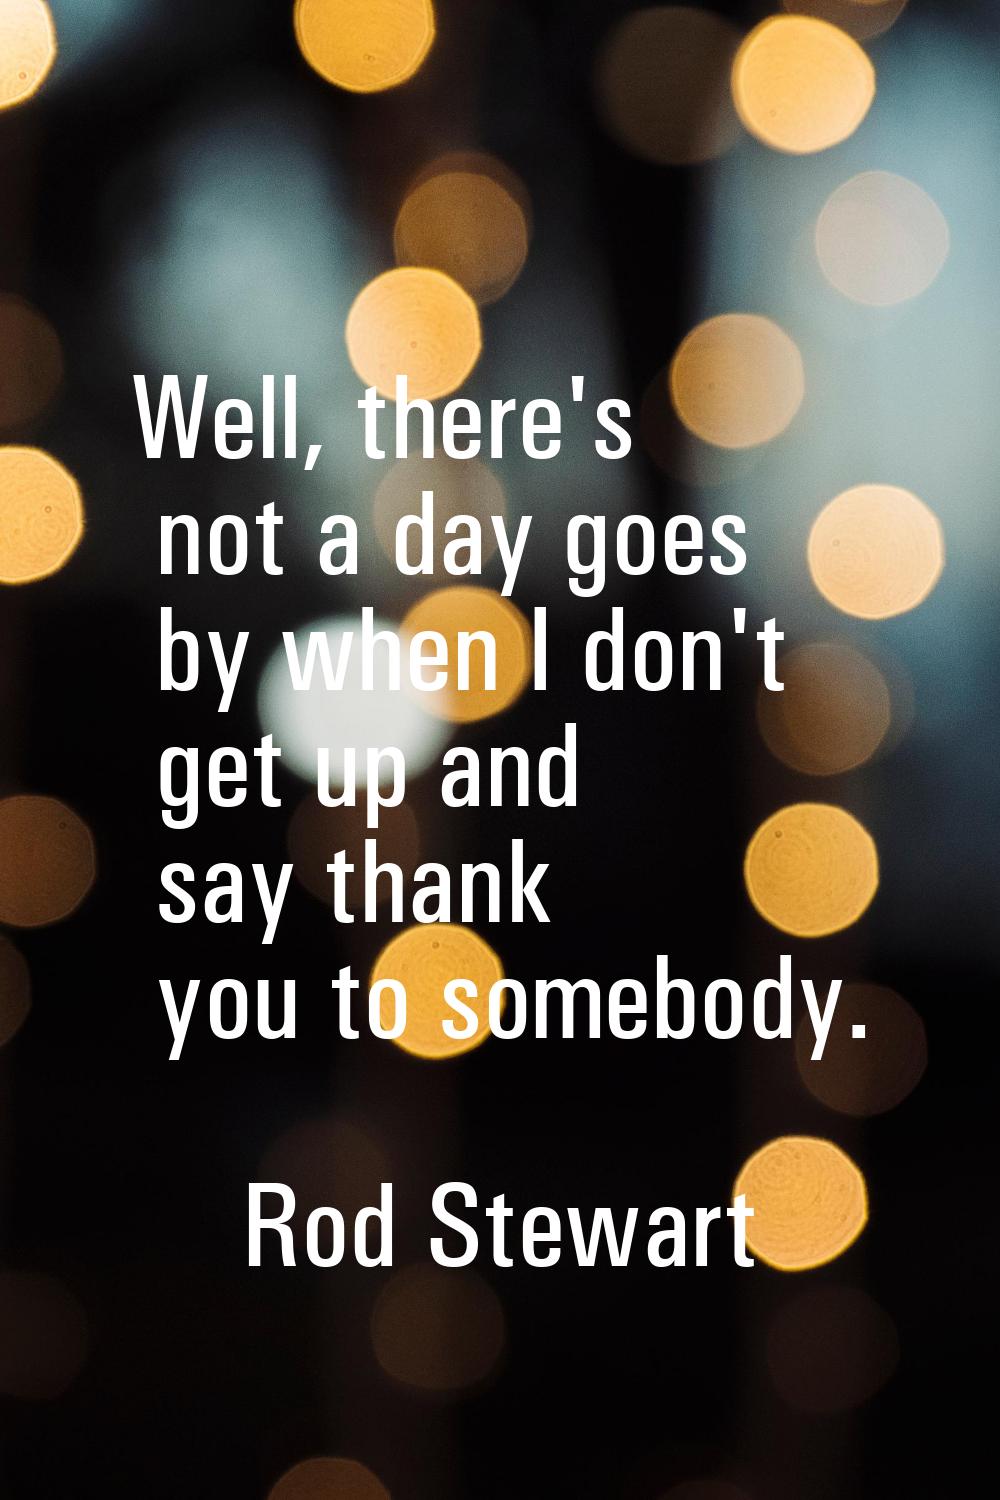 Well, there's not a day goes by when I don't get up and say thank you to somebody.